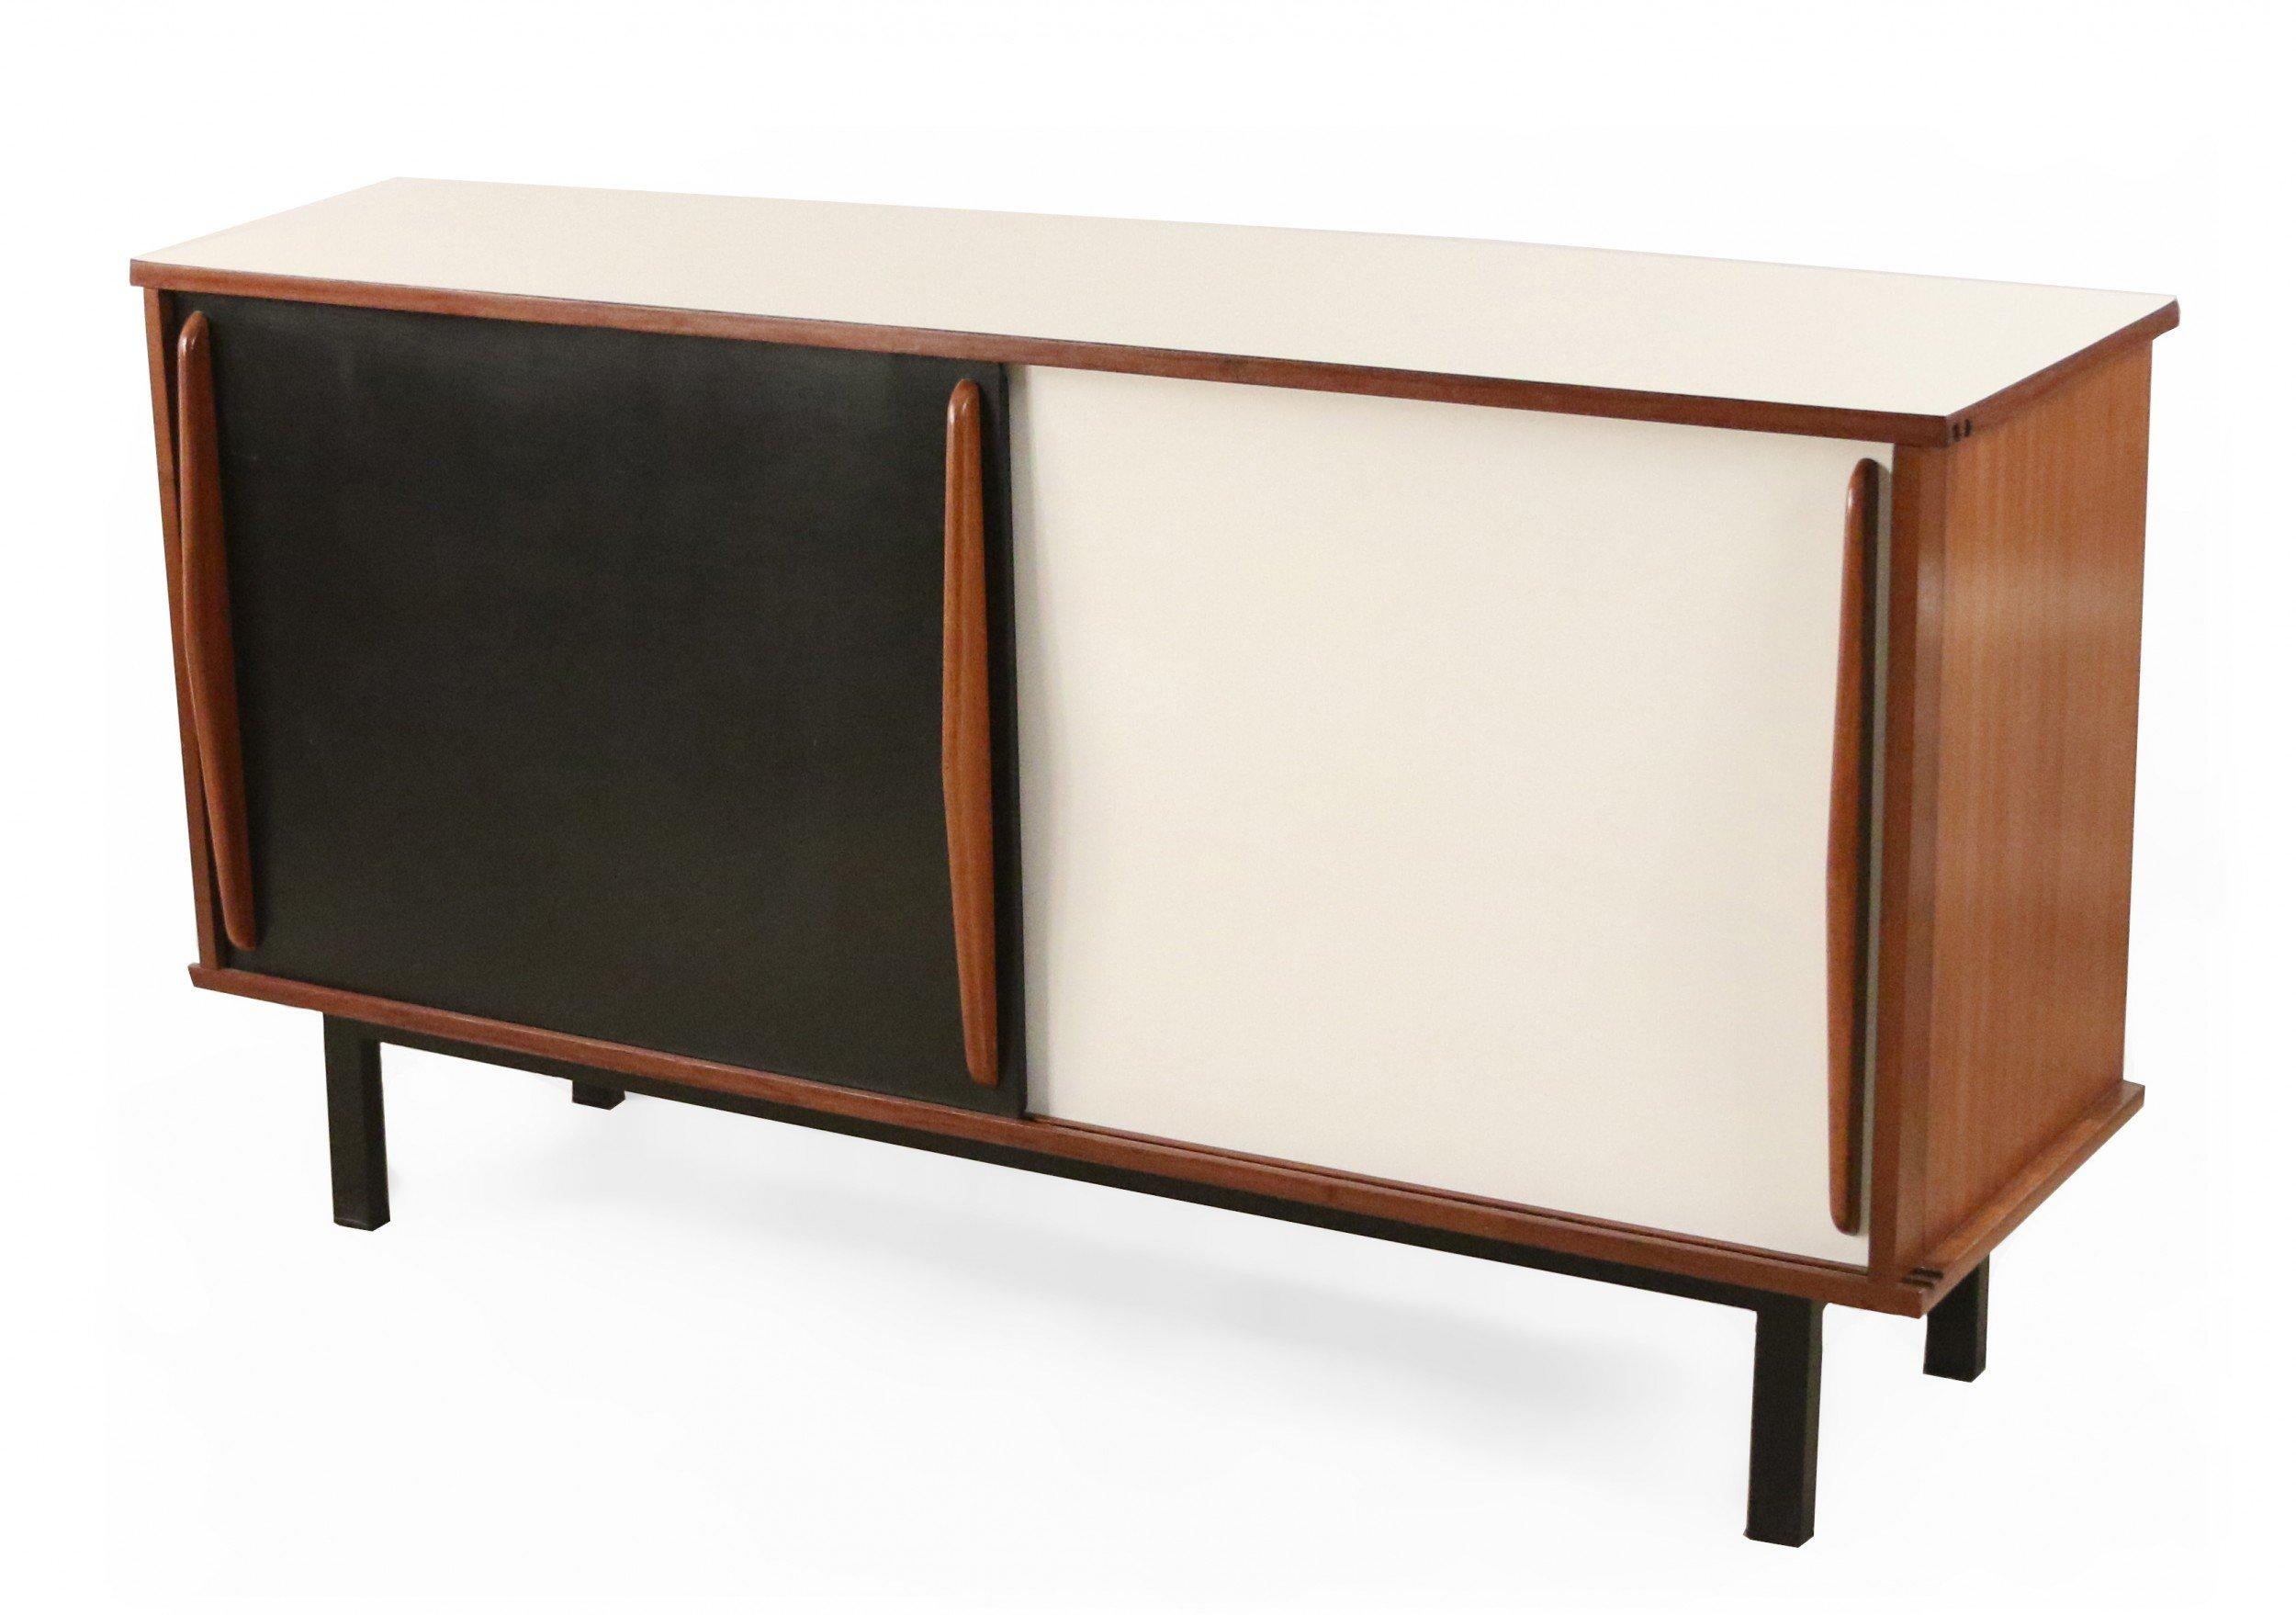 French mid-century (1950s) mahogany wood sideboard with two sliding doors with black and white formica veneer and mahogany grips, a white formica veneer top, and black lacquered metal legs. (CHARLOTTE PERRIAND FOR STEPH SIMON).
 